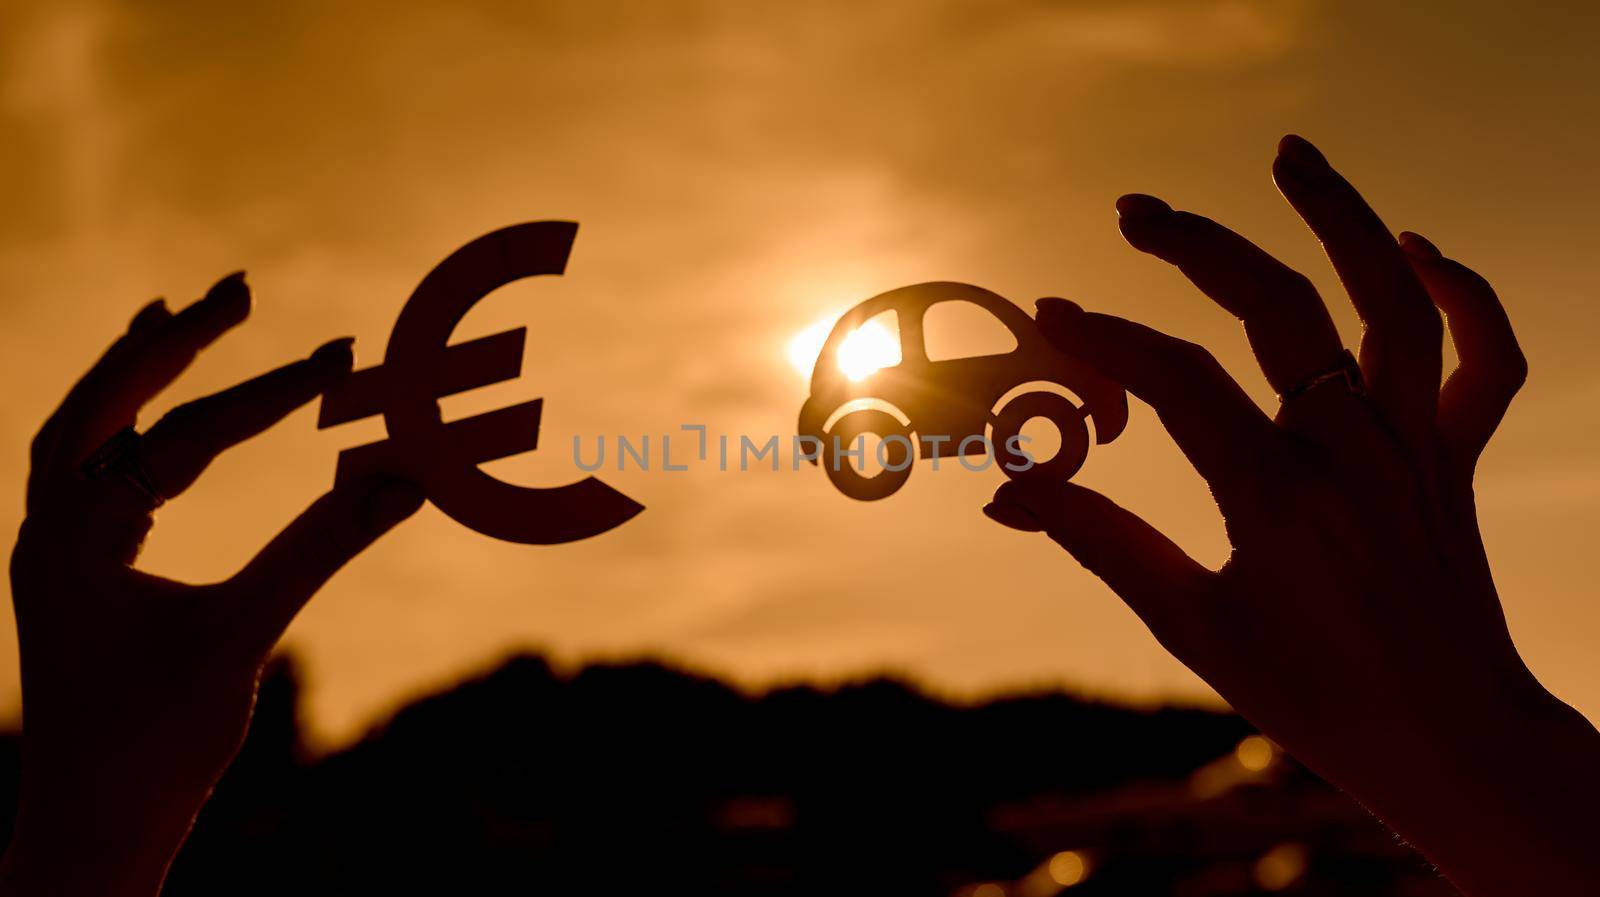 Euro symbol and car in women's hands contoured at sunset by AntonIlchanka